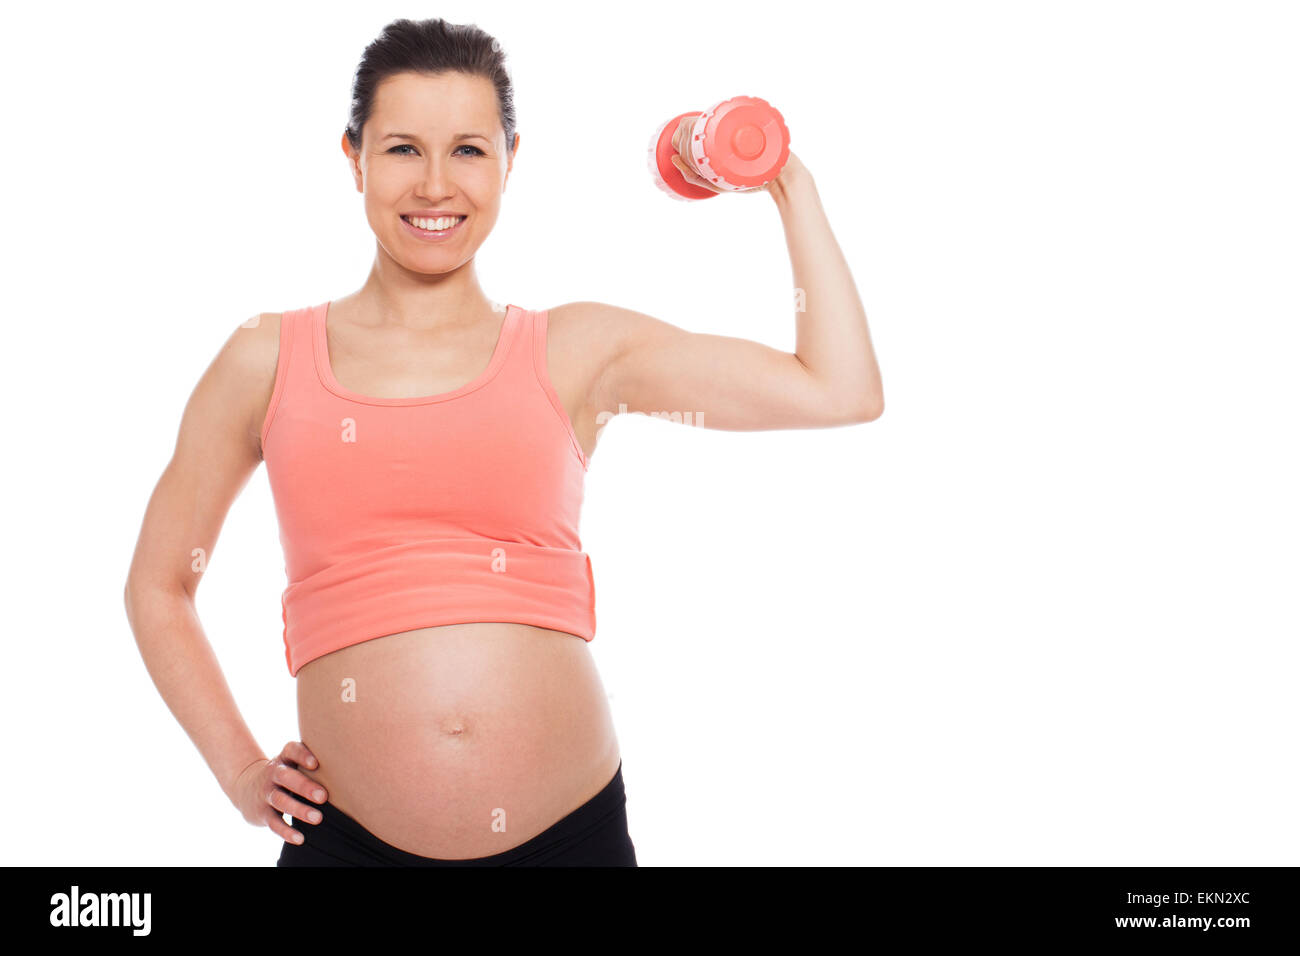 Pregnant woman working out with dumbbells Stock Photo